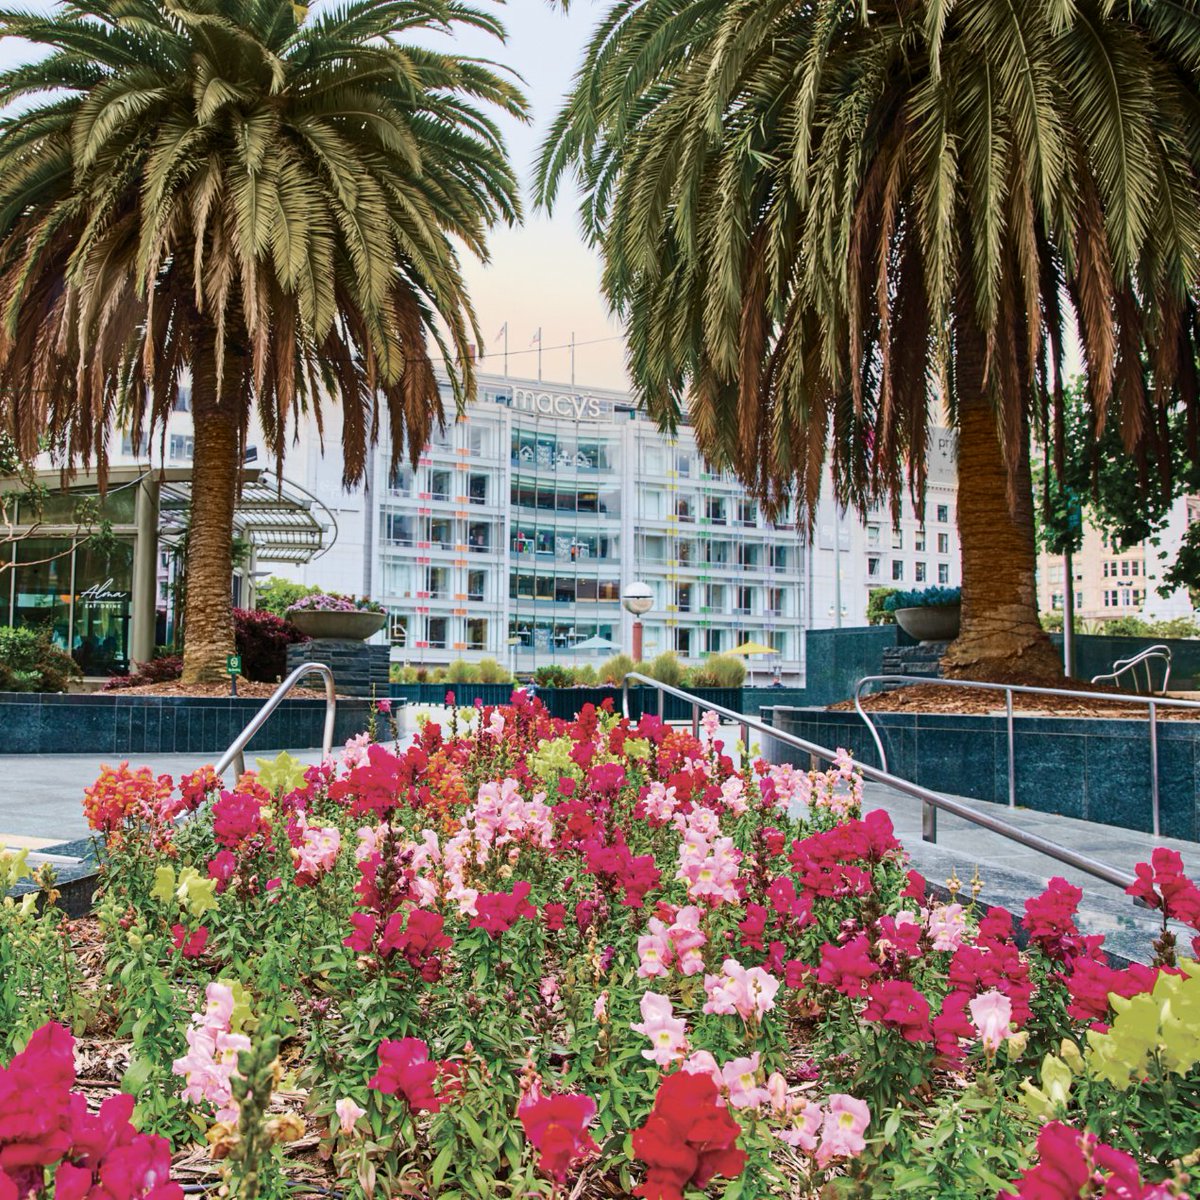 Make sure to visit nearby @UnionSquareSF and discover one of their upcoming events. We are most excited for Tulip Day, Spring Fling, Mother's Day Fashion Show, and Blooms & Bubbles Bar Crawl. hil.tn/dco2mk